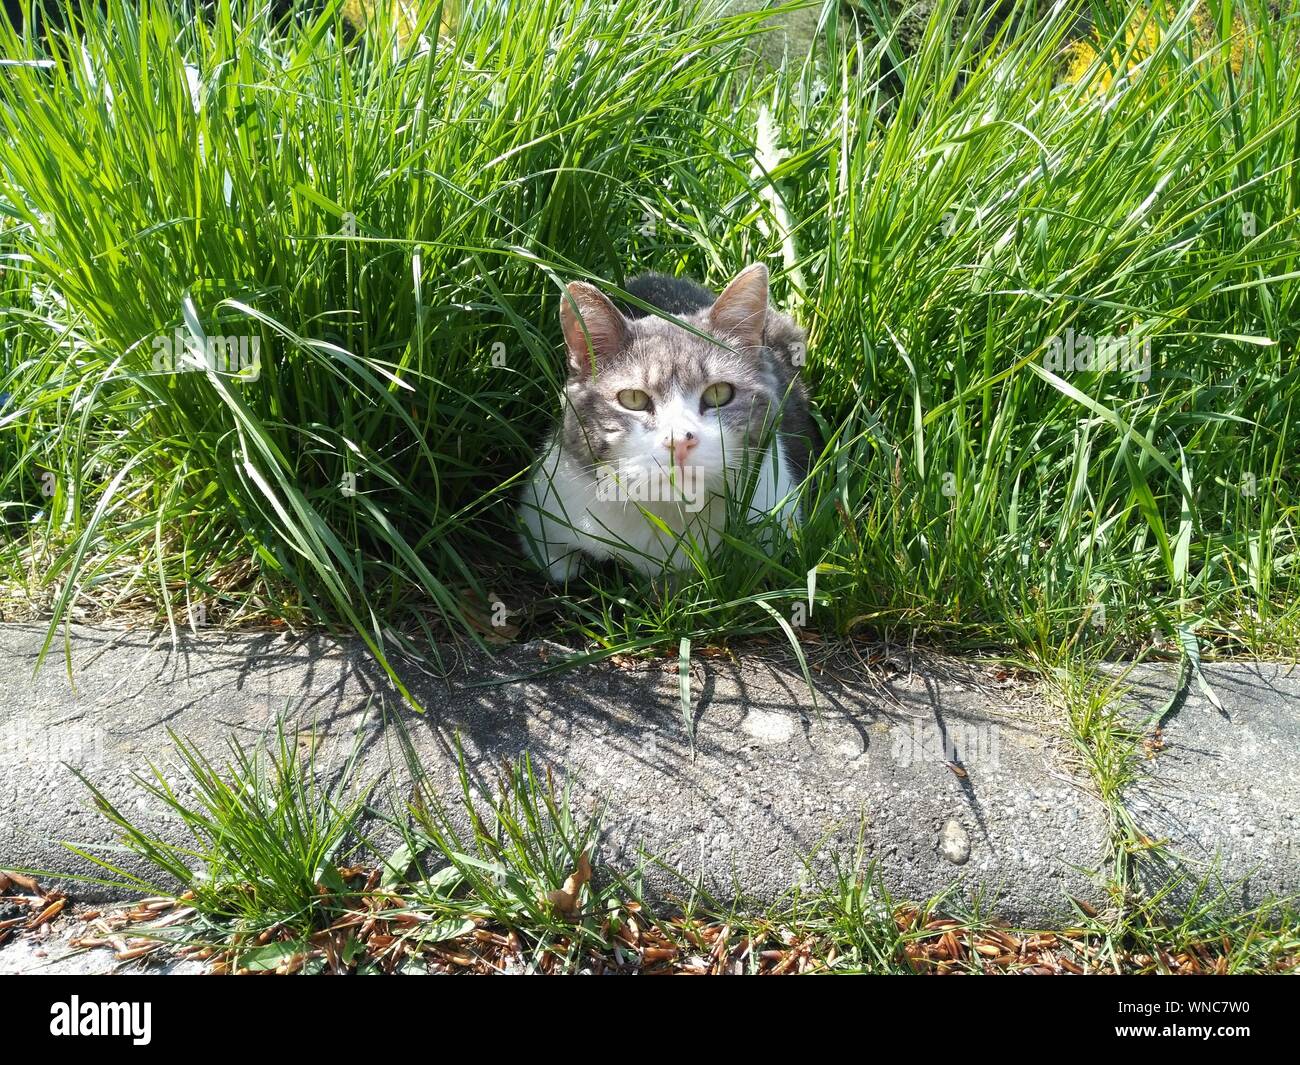 Portrait Of Cat On Relaxing On Grassy Field Stock Photo